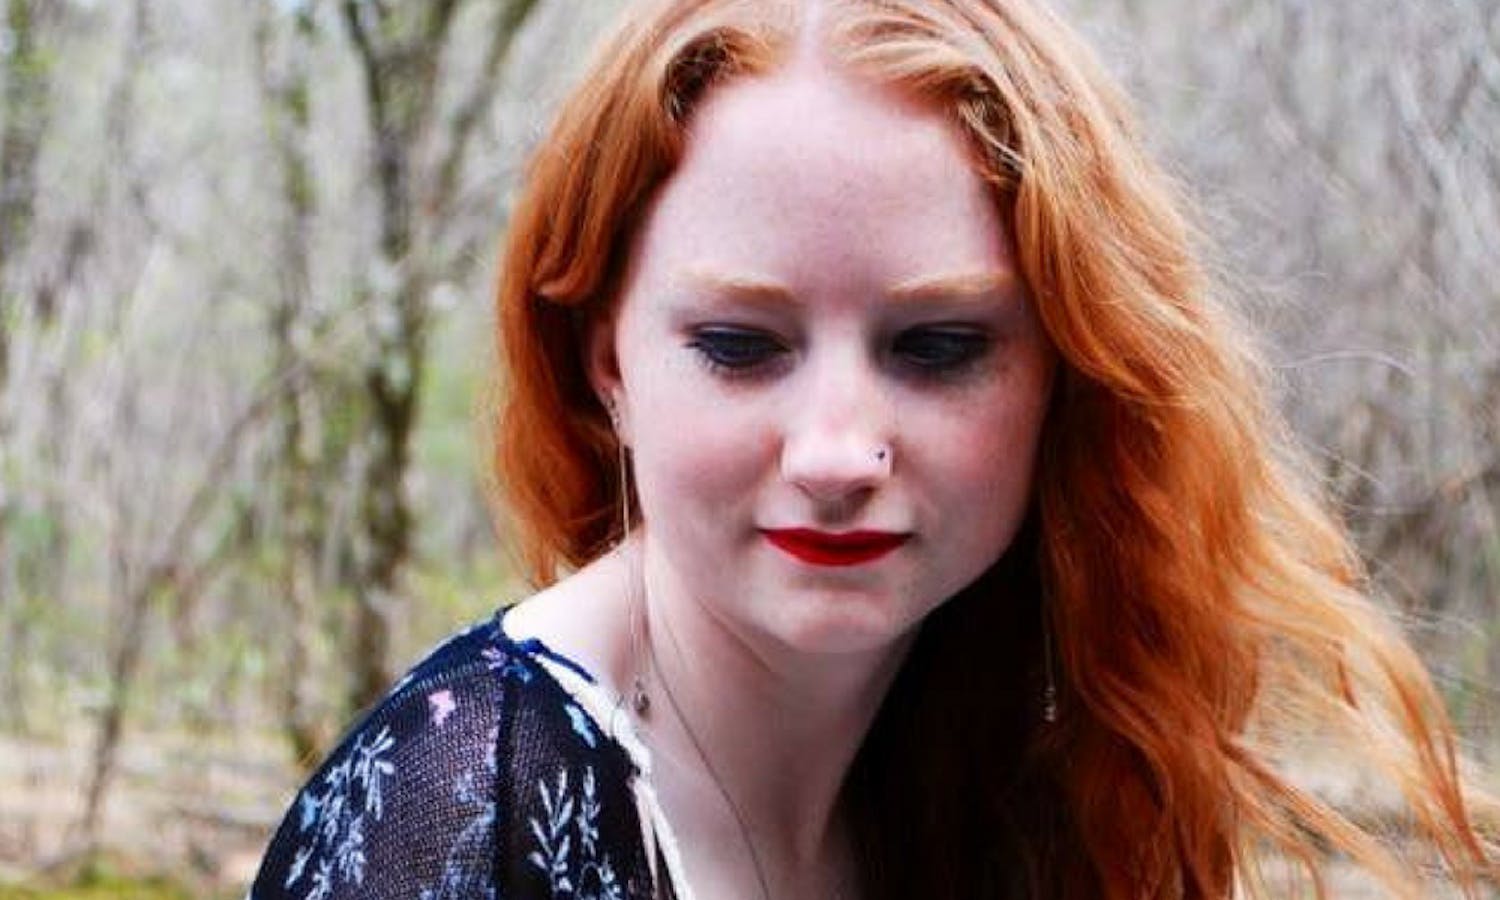 Cassidy Meadows, 20, was a student at Auburn. She was killed in a crash on Interstate 85 on Wednesday.